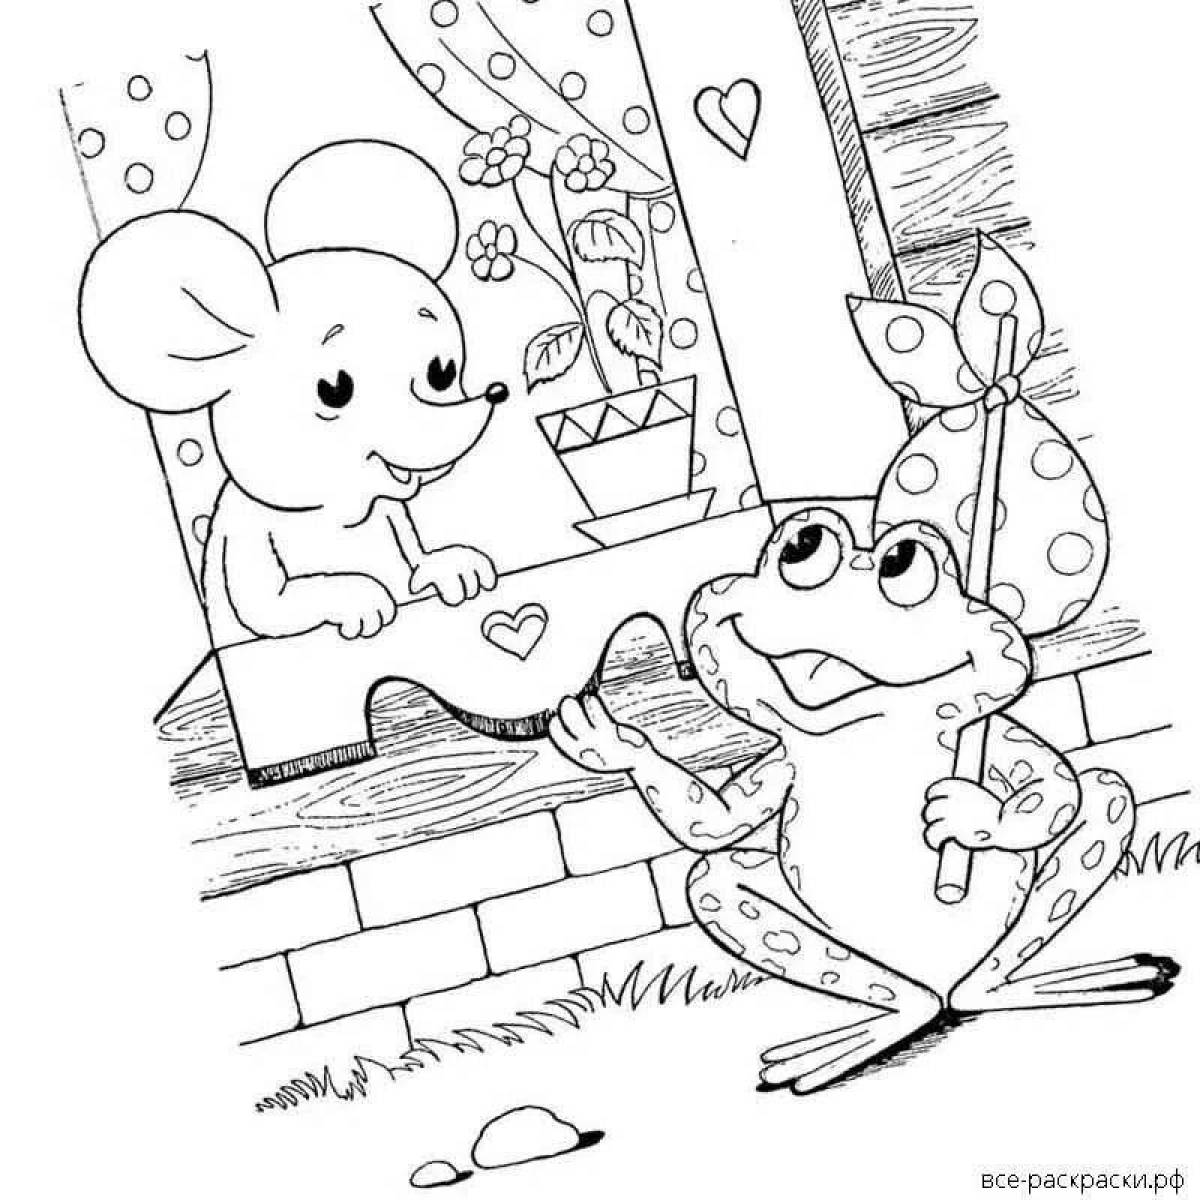 Charming house coloring book for preschoolers